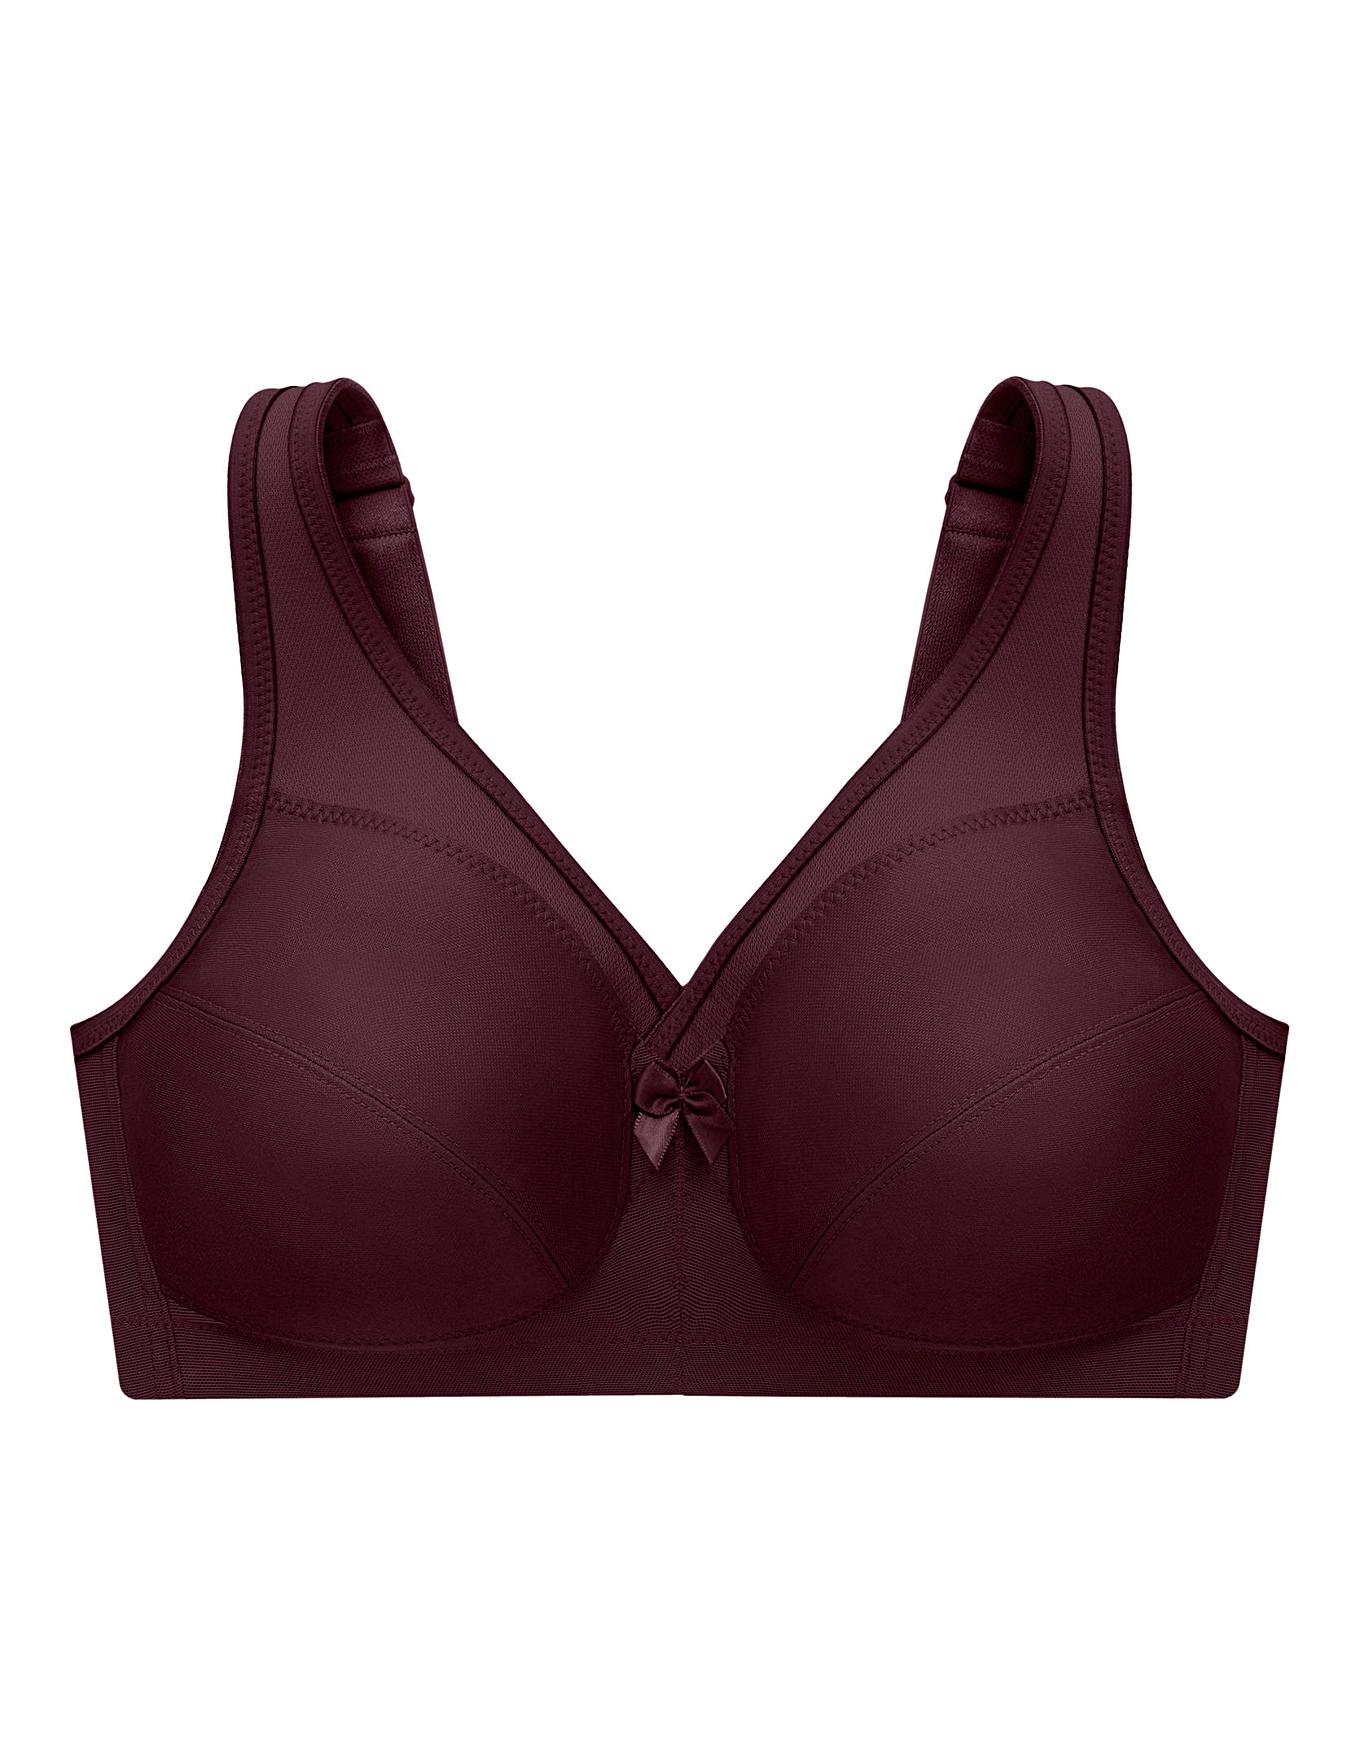 Glamorise Womens MagicLift Active Support Wirefree Bra 1005 Wine 42C